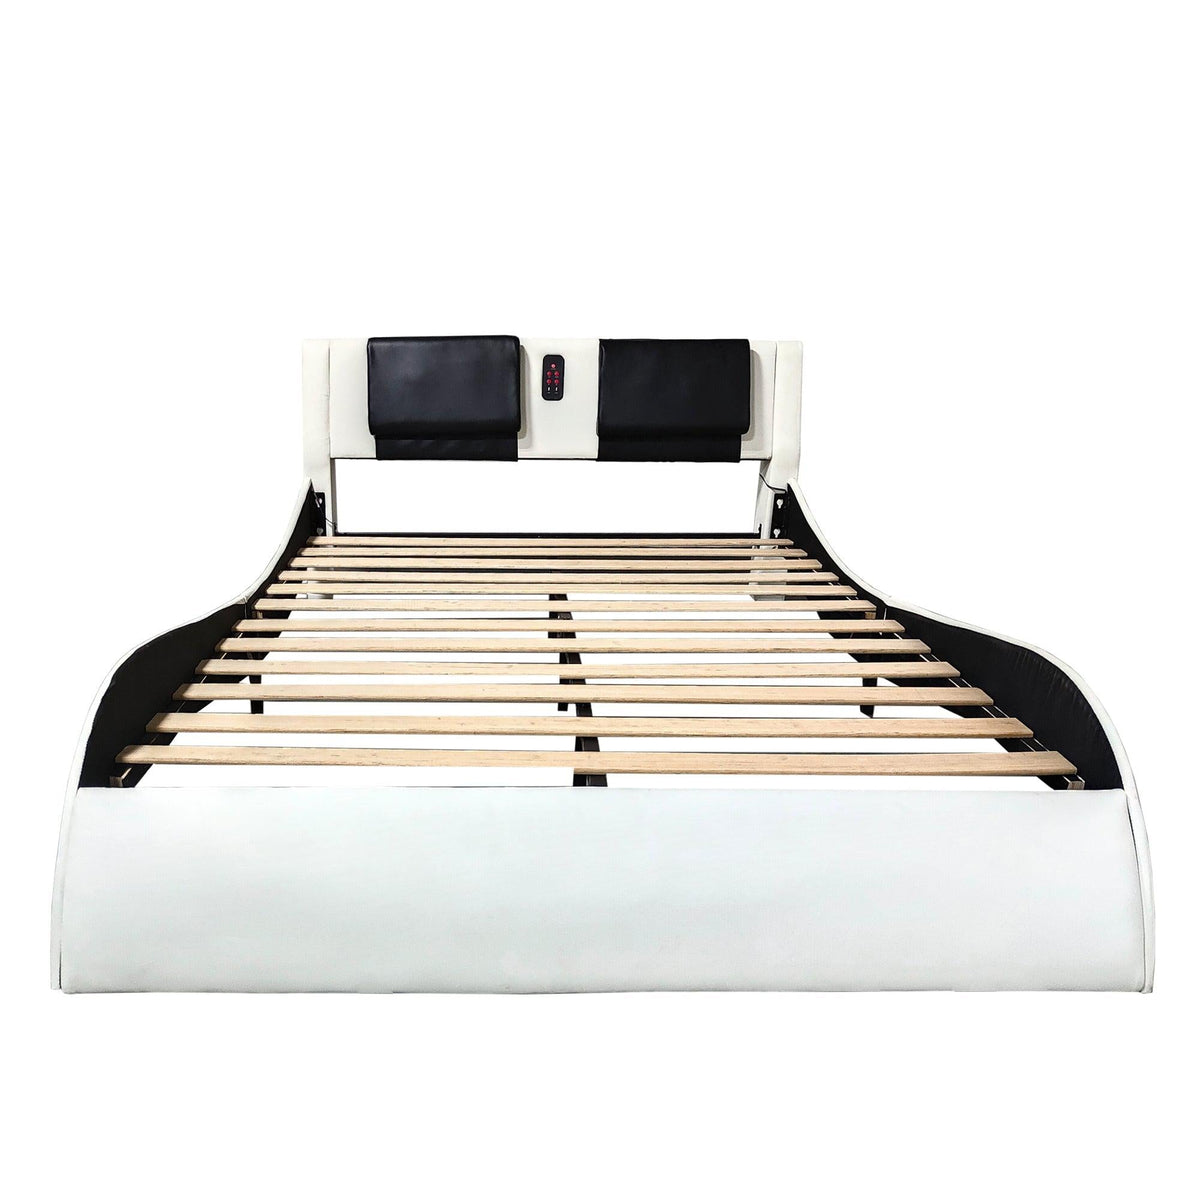 mattress xperts Miami Modern Queen Bed with LED, Speaking USB Miami Modern Queen Bed with LEDs, Speaker USB Mattress-Xperts-Florida